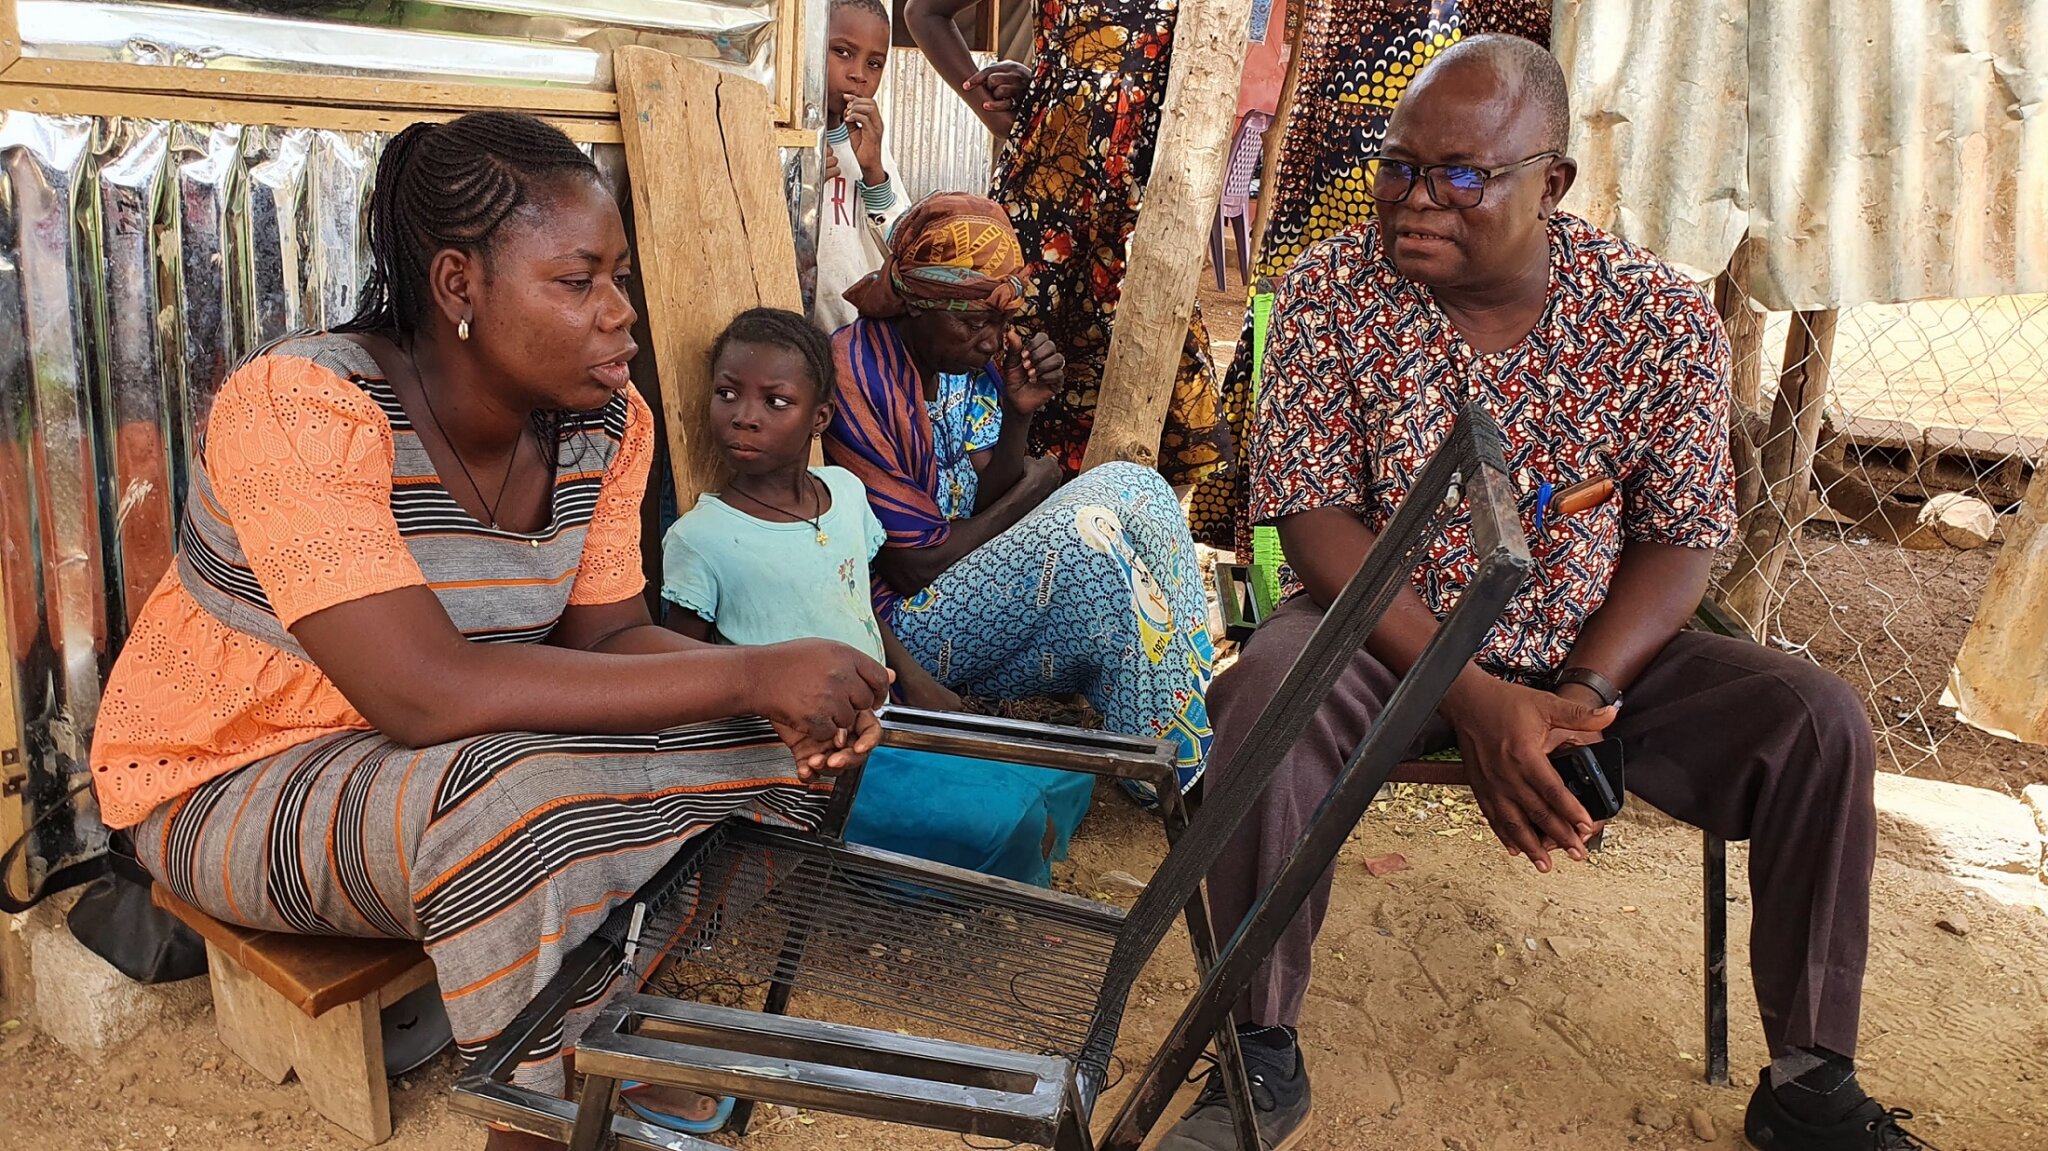 a young Burkinabe woman is repairing a chair, next to her sits a middle-aged black man with glasses and children sit in the background.